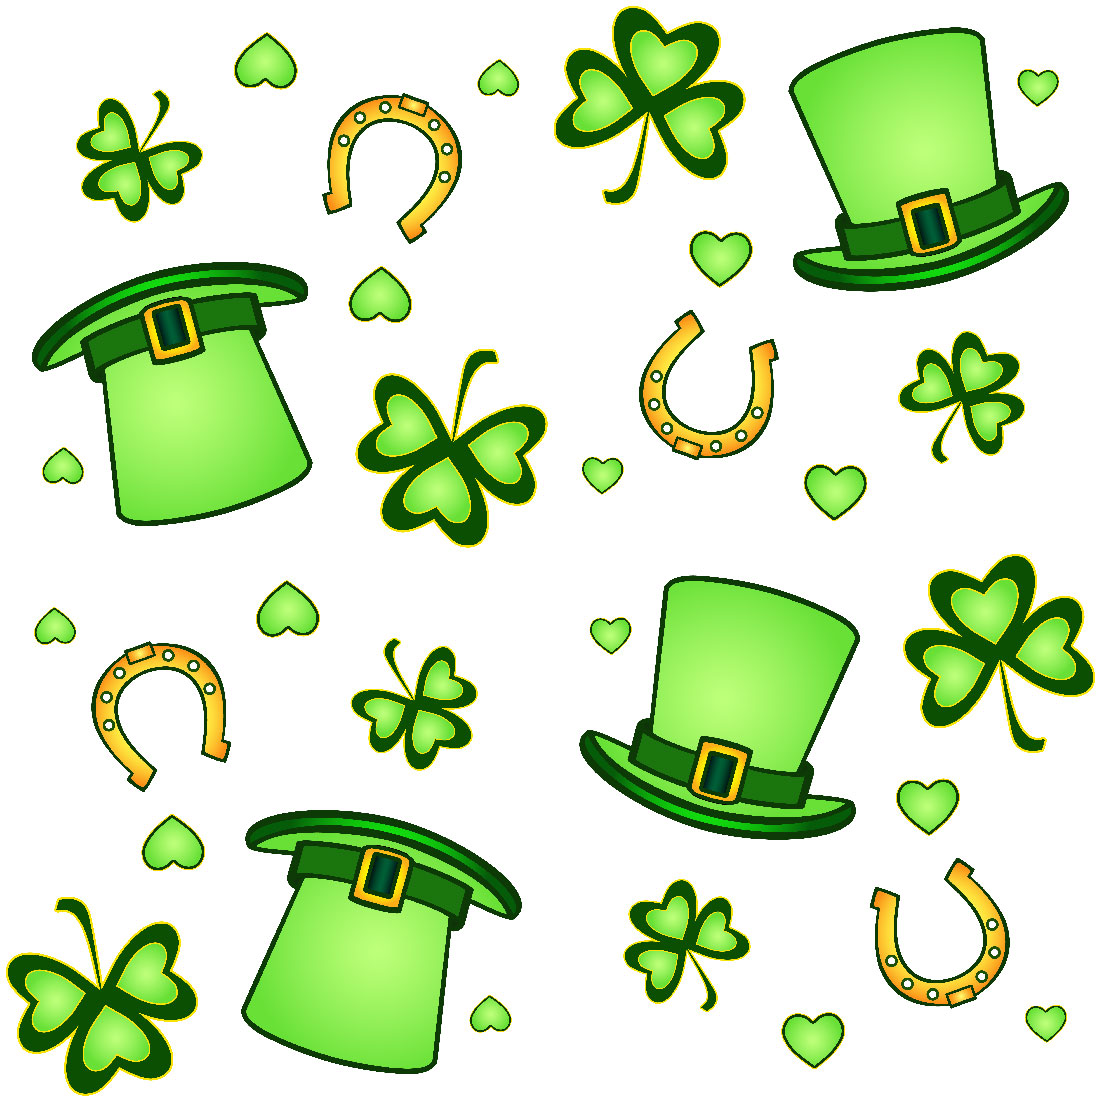 Green hat with shamrocks and a horseshoe.